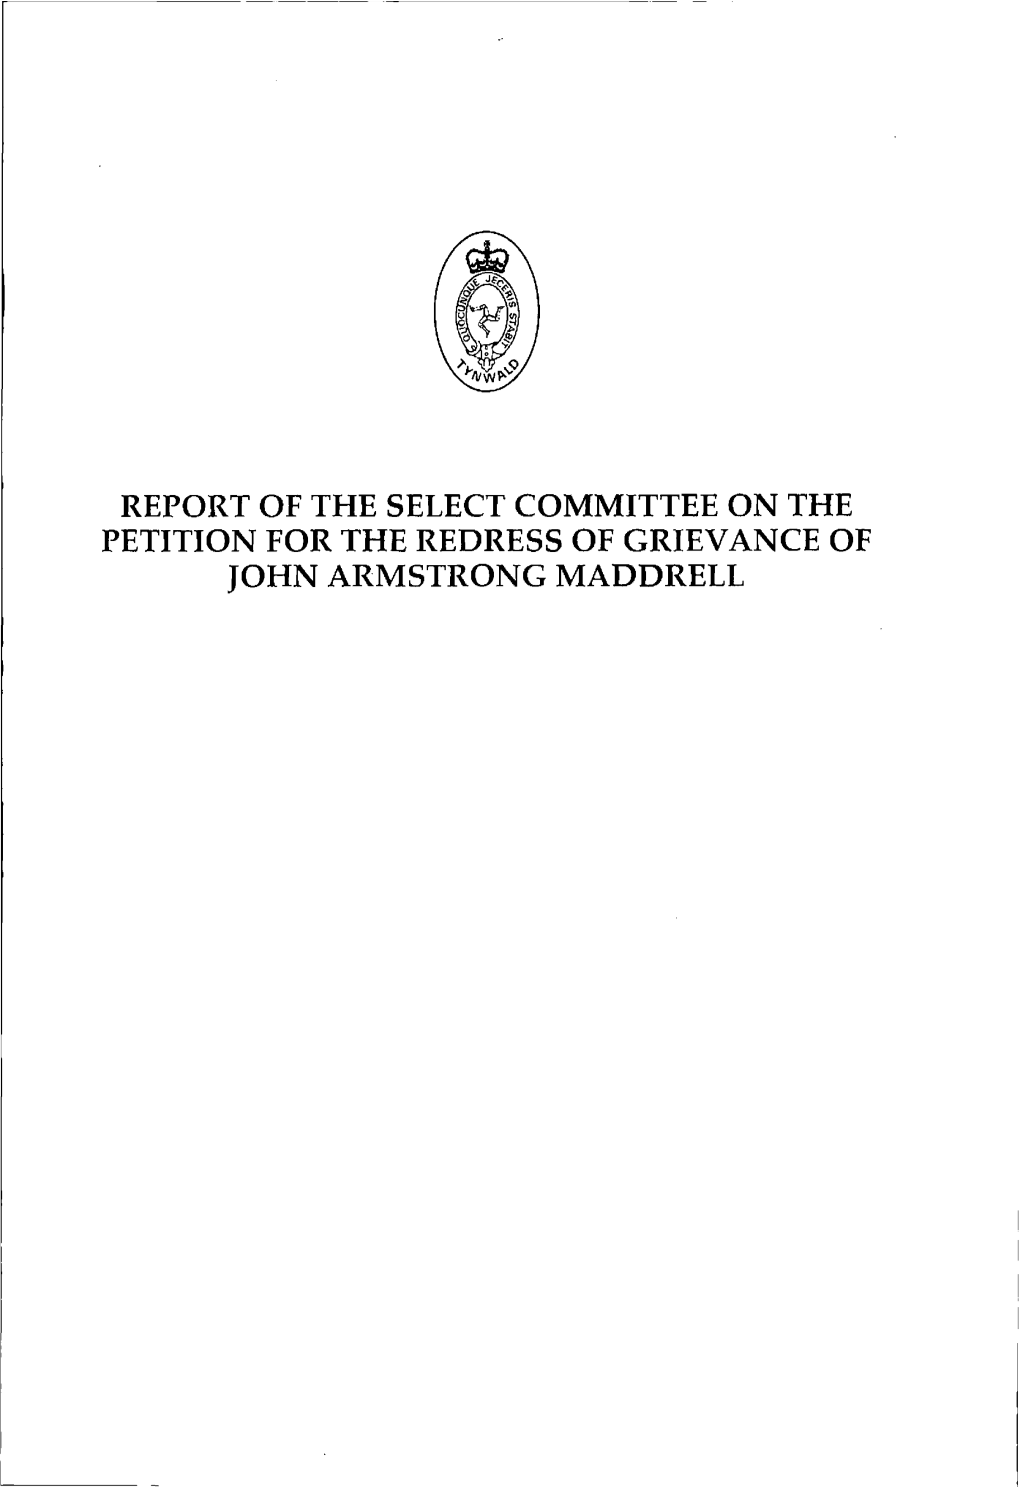 Report of the Select Committee on the Petition for the Redress of Grievance of John Armstrong Maddrell